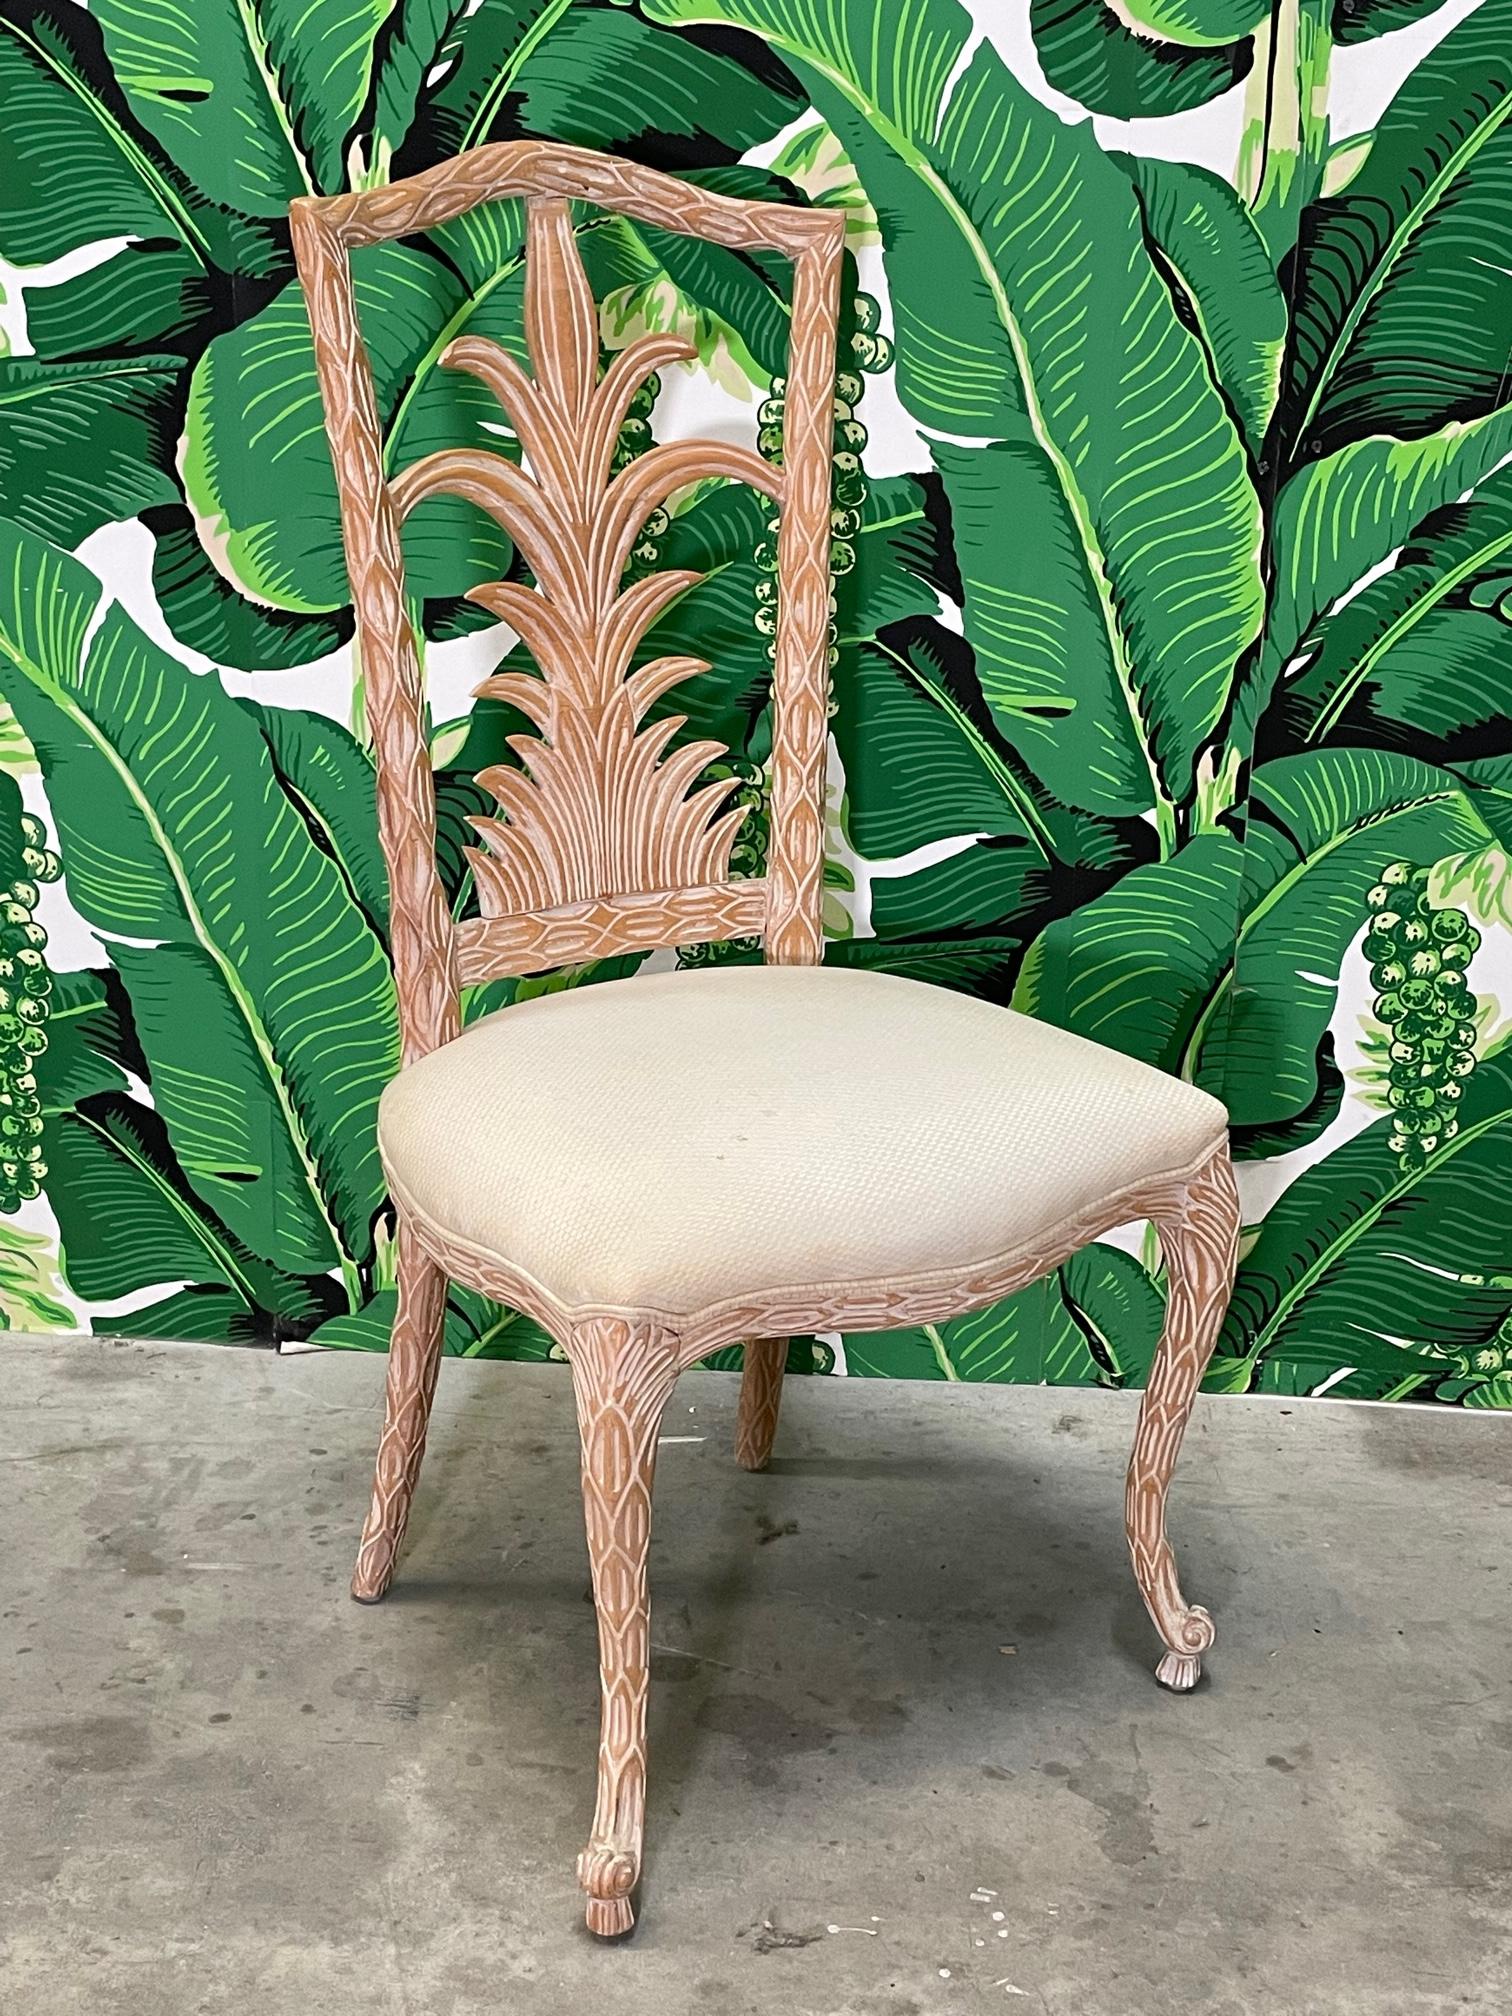 Set of six dining chairs feature faux bois style carved wood frames with a palm tree motif and splayed legs. Good condition with imperfections consistent with age, see photos for condition details. 
For a shipping quote to your exact zip code,